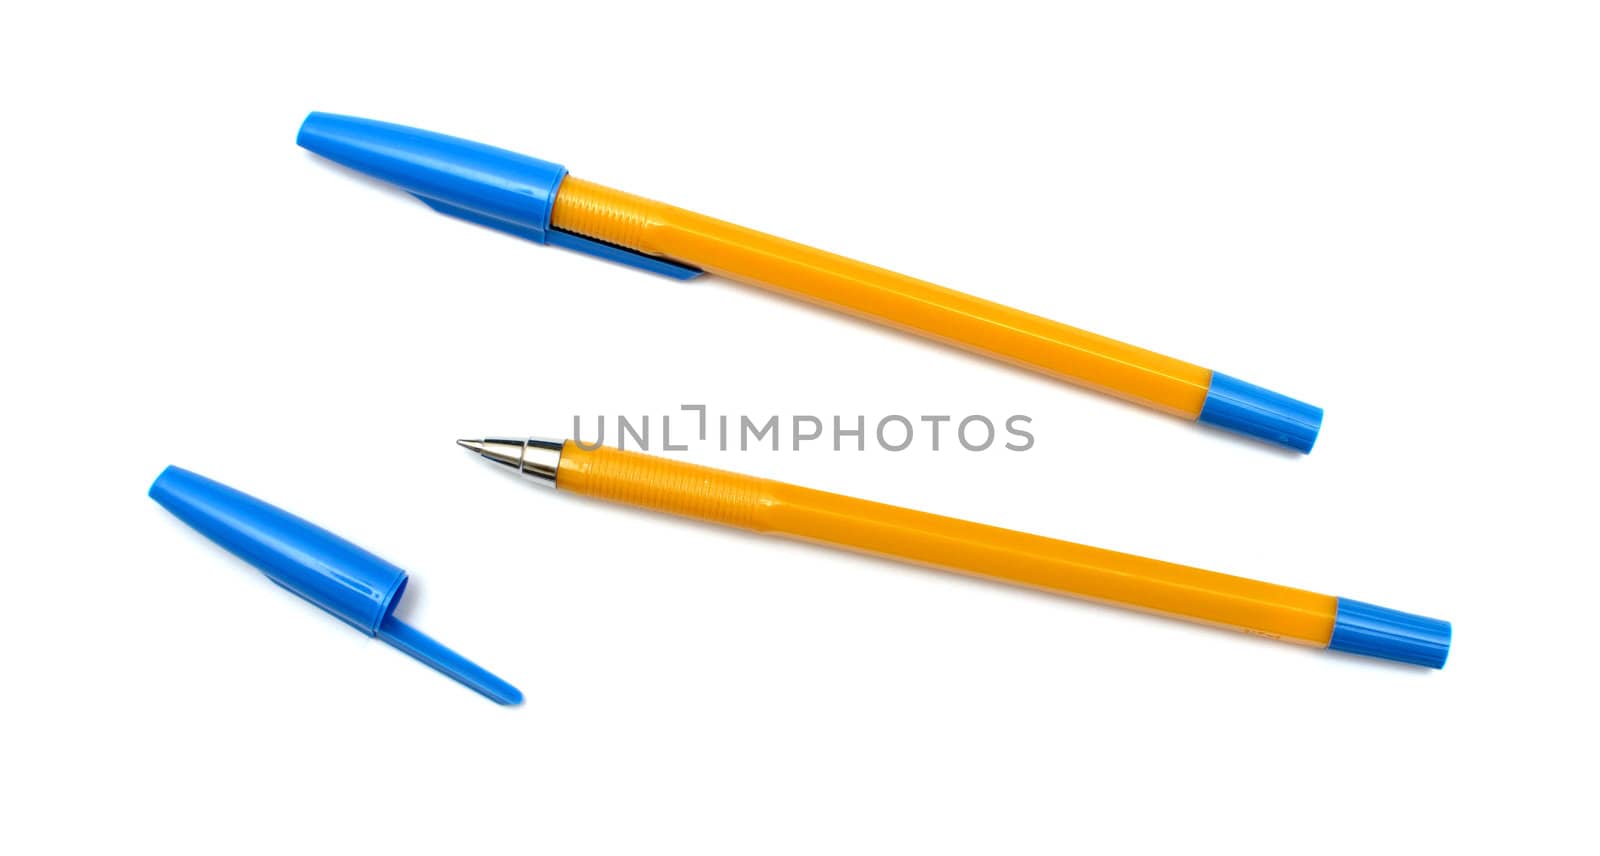 Two yellow pens. Isolated on white background